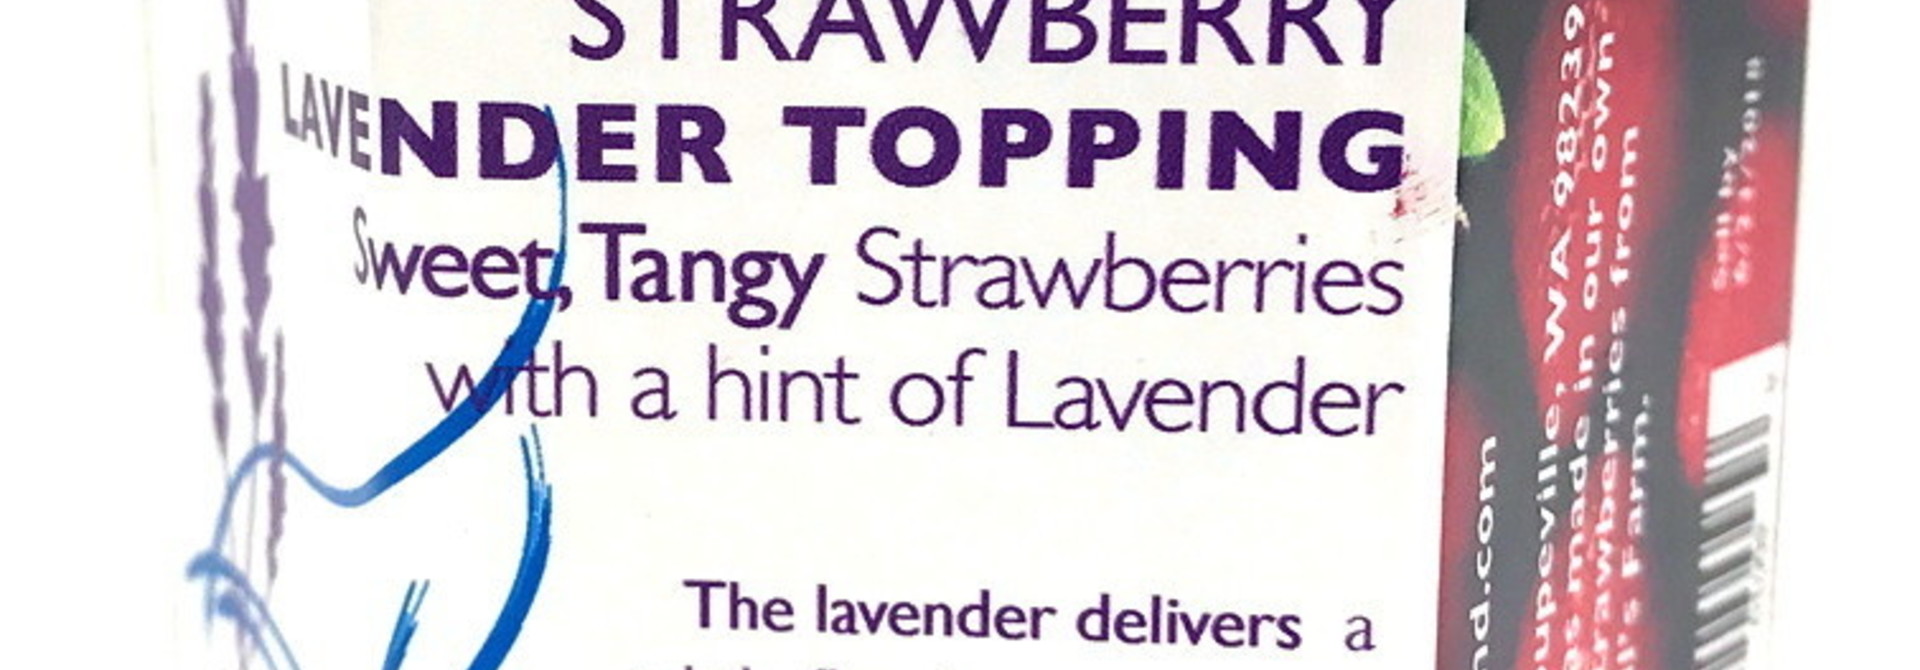 Strawberry Lavender Topping